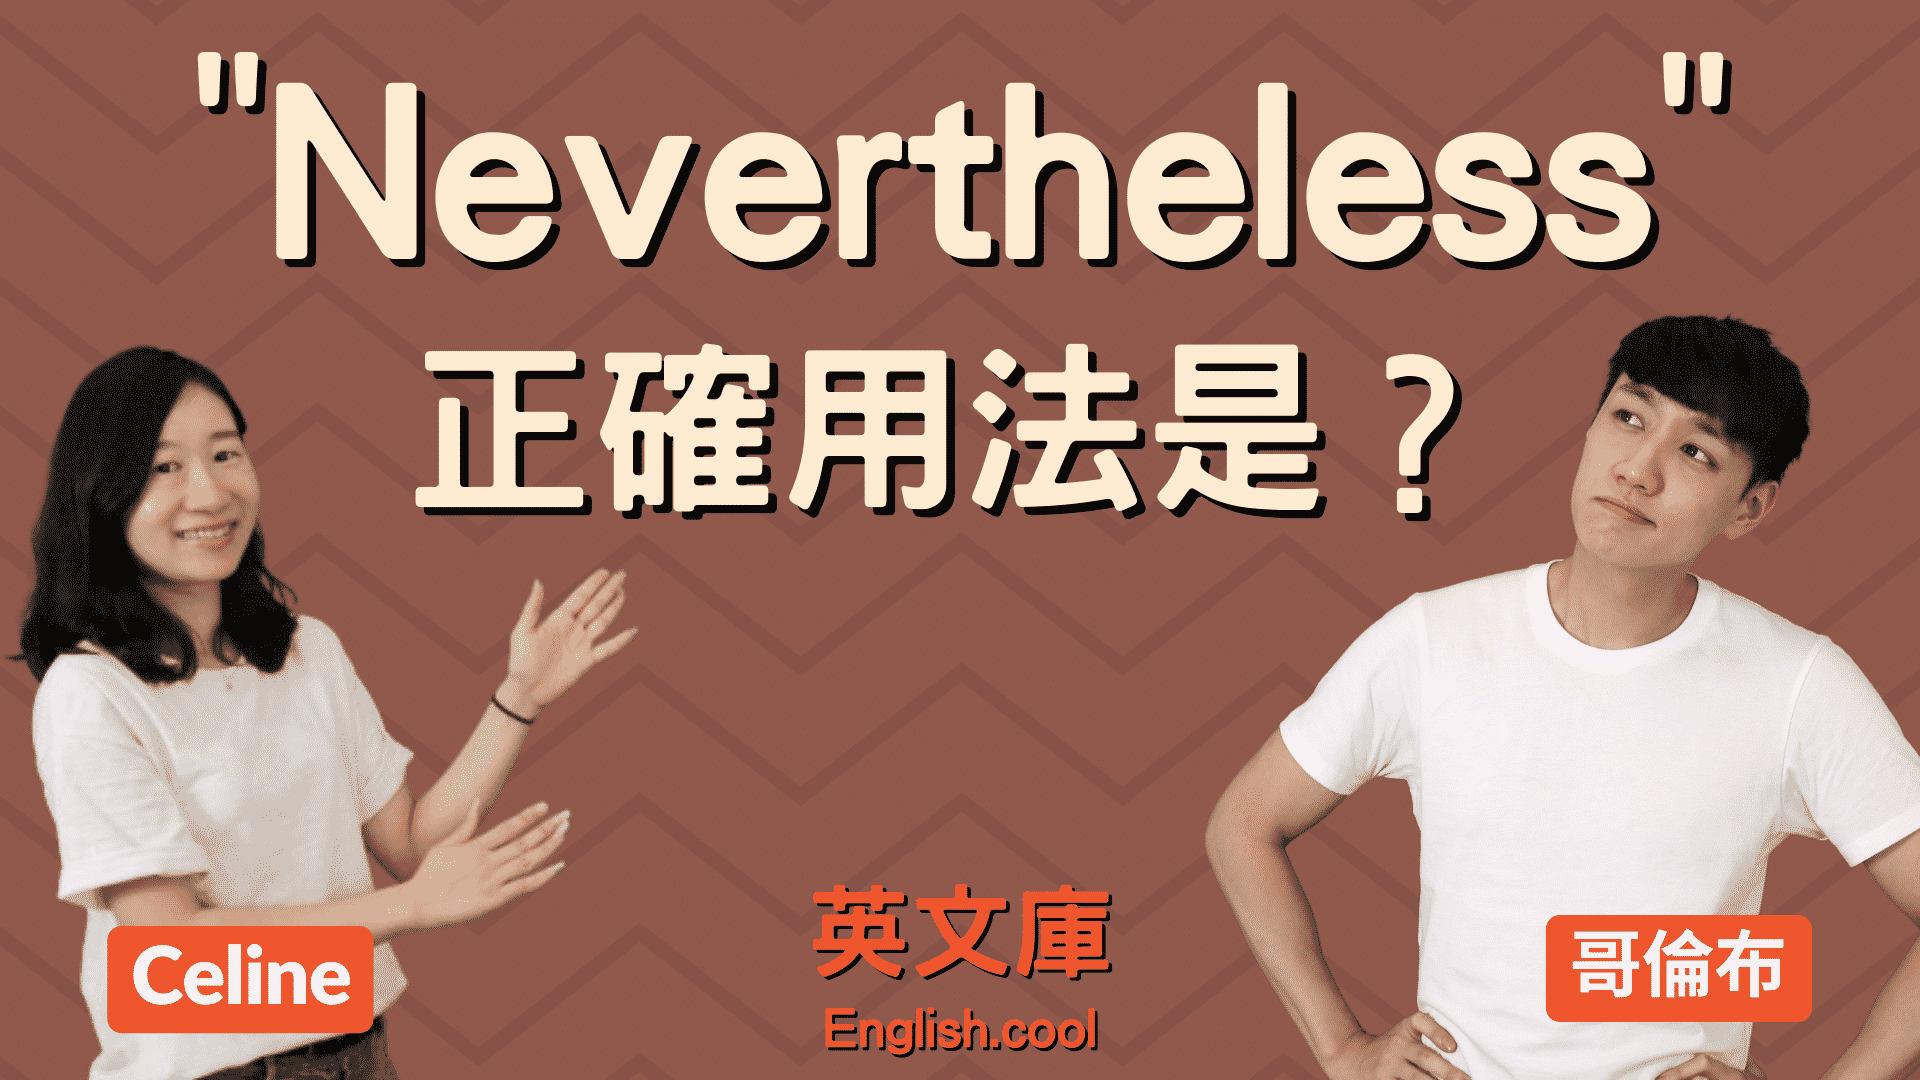 You are currently viewing 「nevertheless」的正確用法是？跟 nonetheless 差在哪？